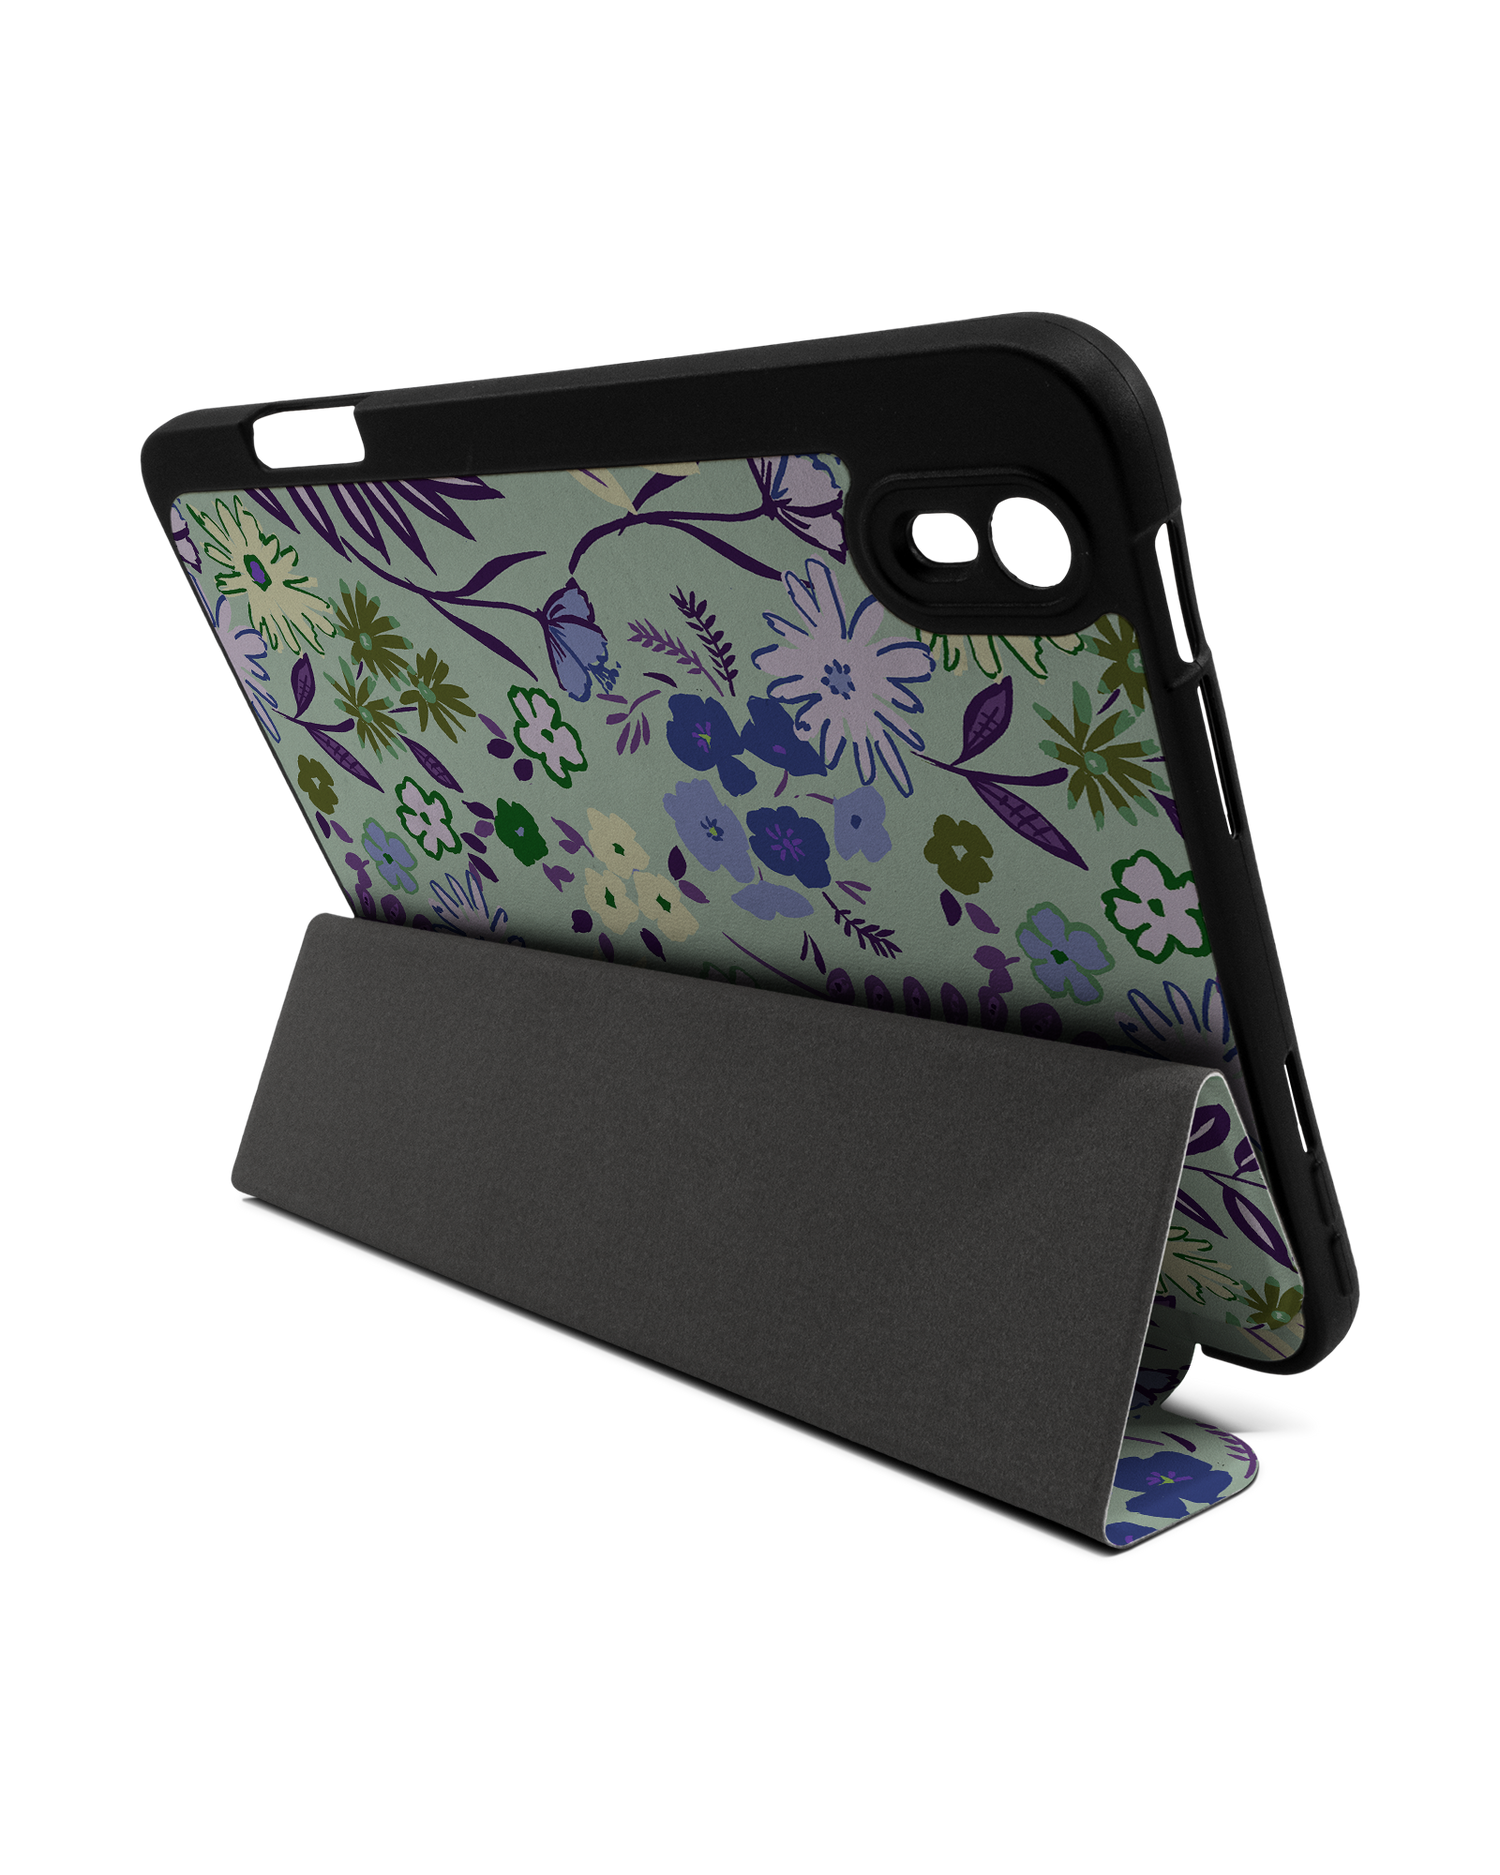 Pretty Purple Flowers iPad Case with Pencil Holder Apple iPad mini 6 (2021): Set up in landscape format (back view)